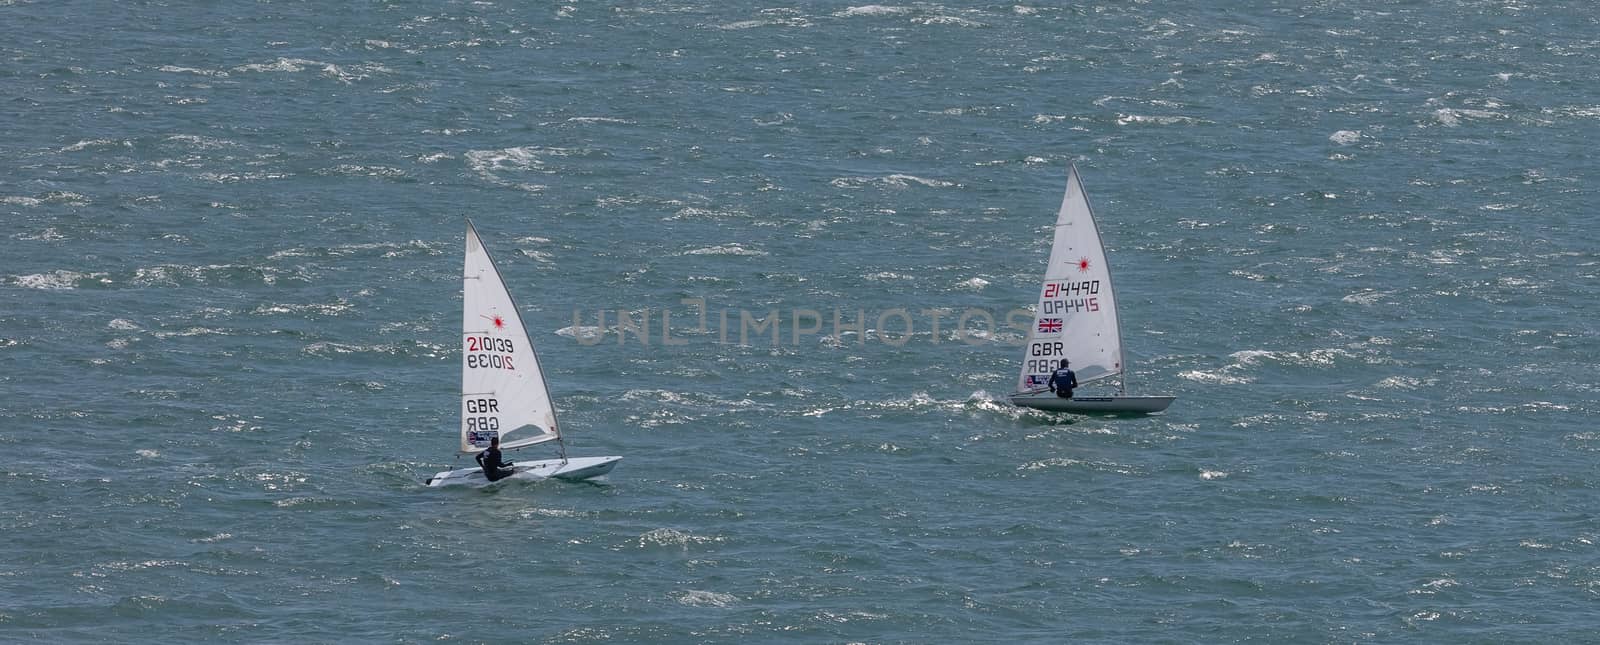 Portland harbour, United Kingdom - July 3, 2020: High Angle aerial panoramic shot of two laser class racing dinghies in Portland harbour.